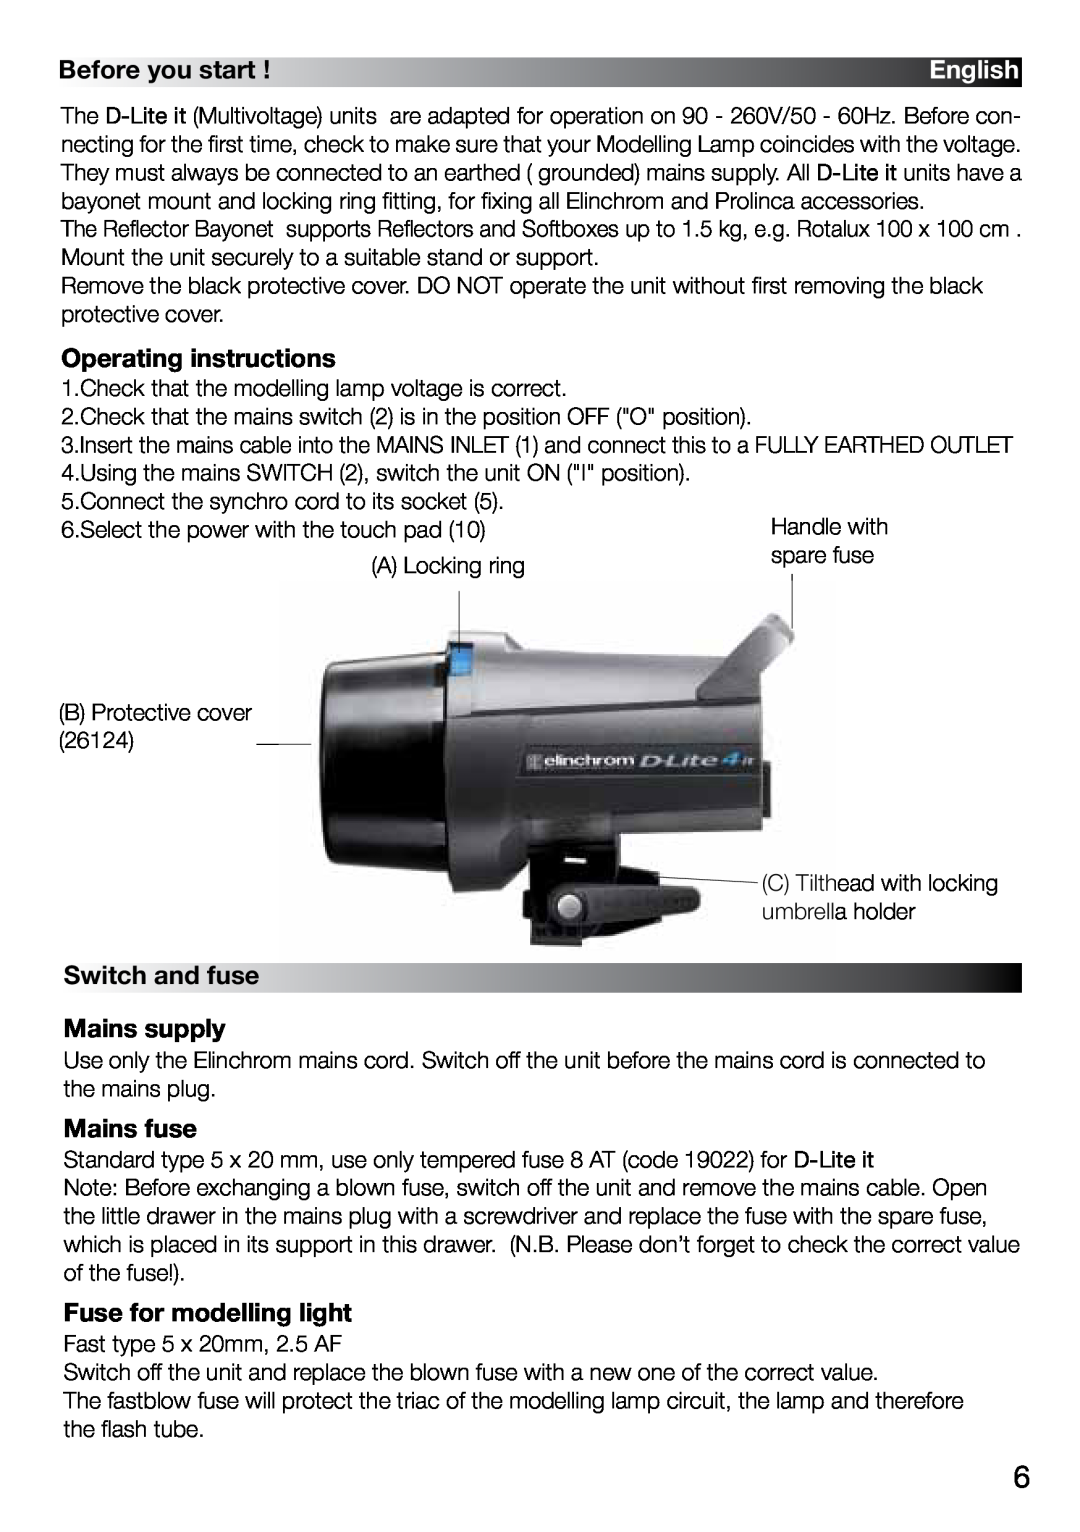 Elinchrom 4 IT, 2 IT Before you start, Operating instructions, Switch and fuse Mains supply, Mains fuse, English 